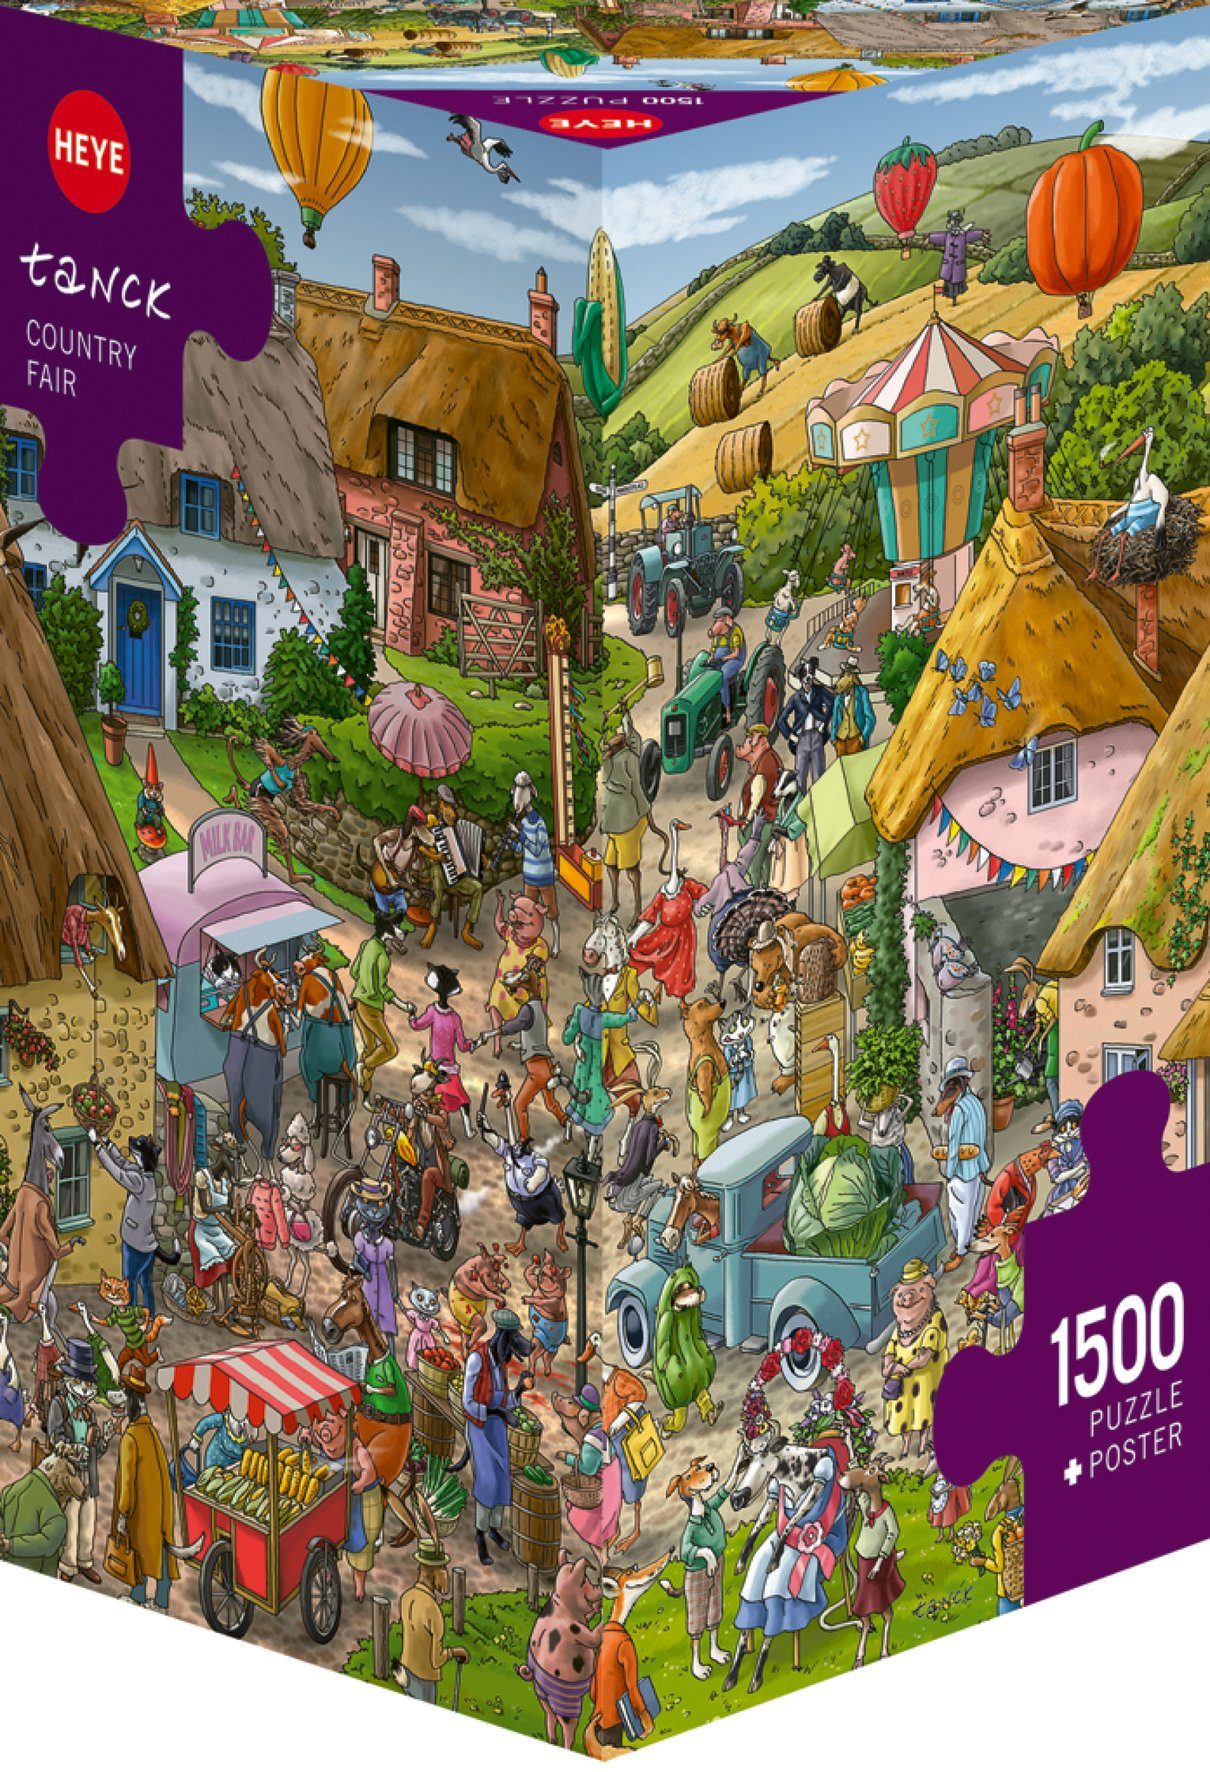 HEYE Puzzle Country Fair, Tanck, 1500 Puzzleteile, Made in Europe